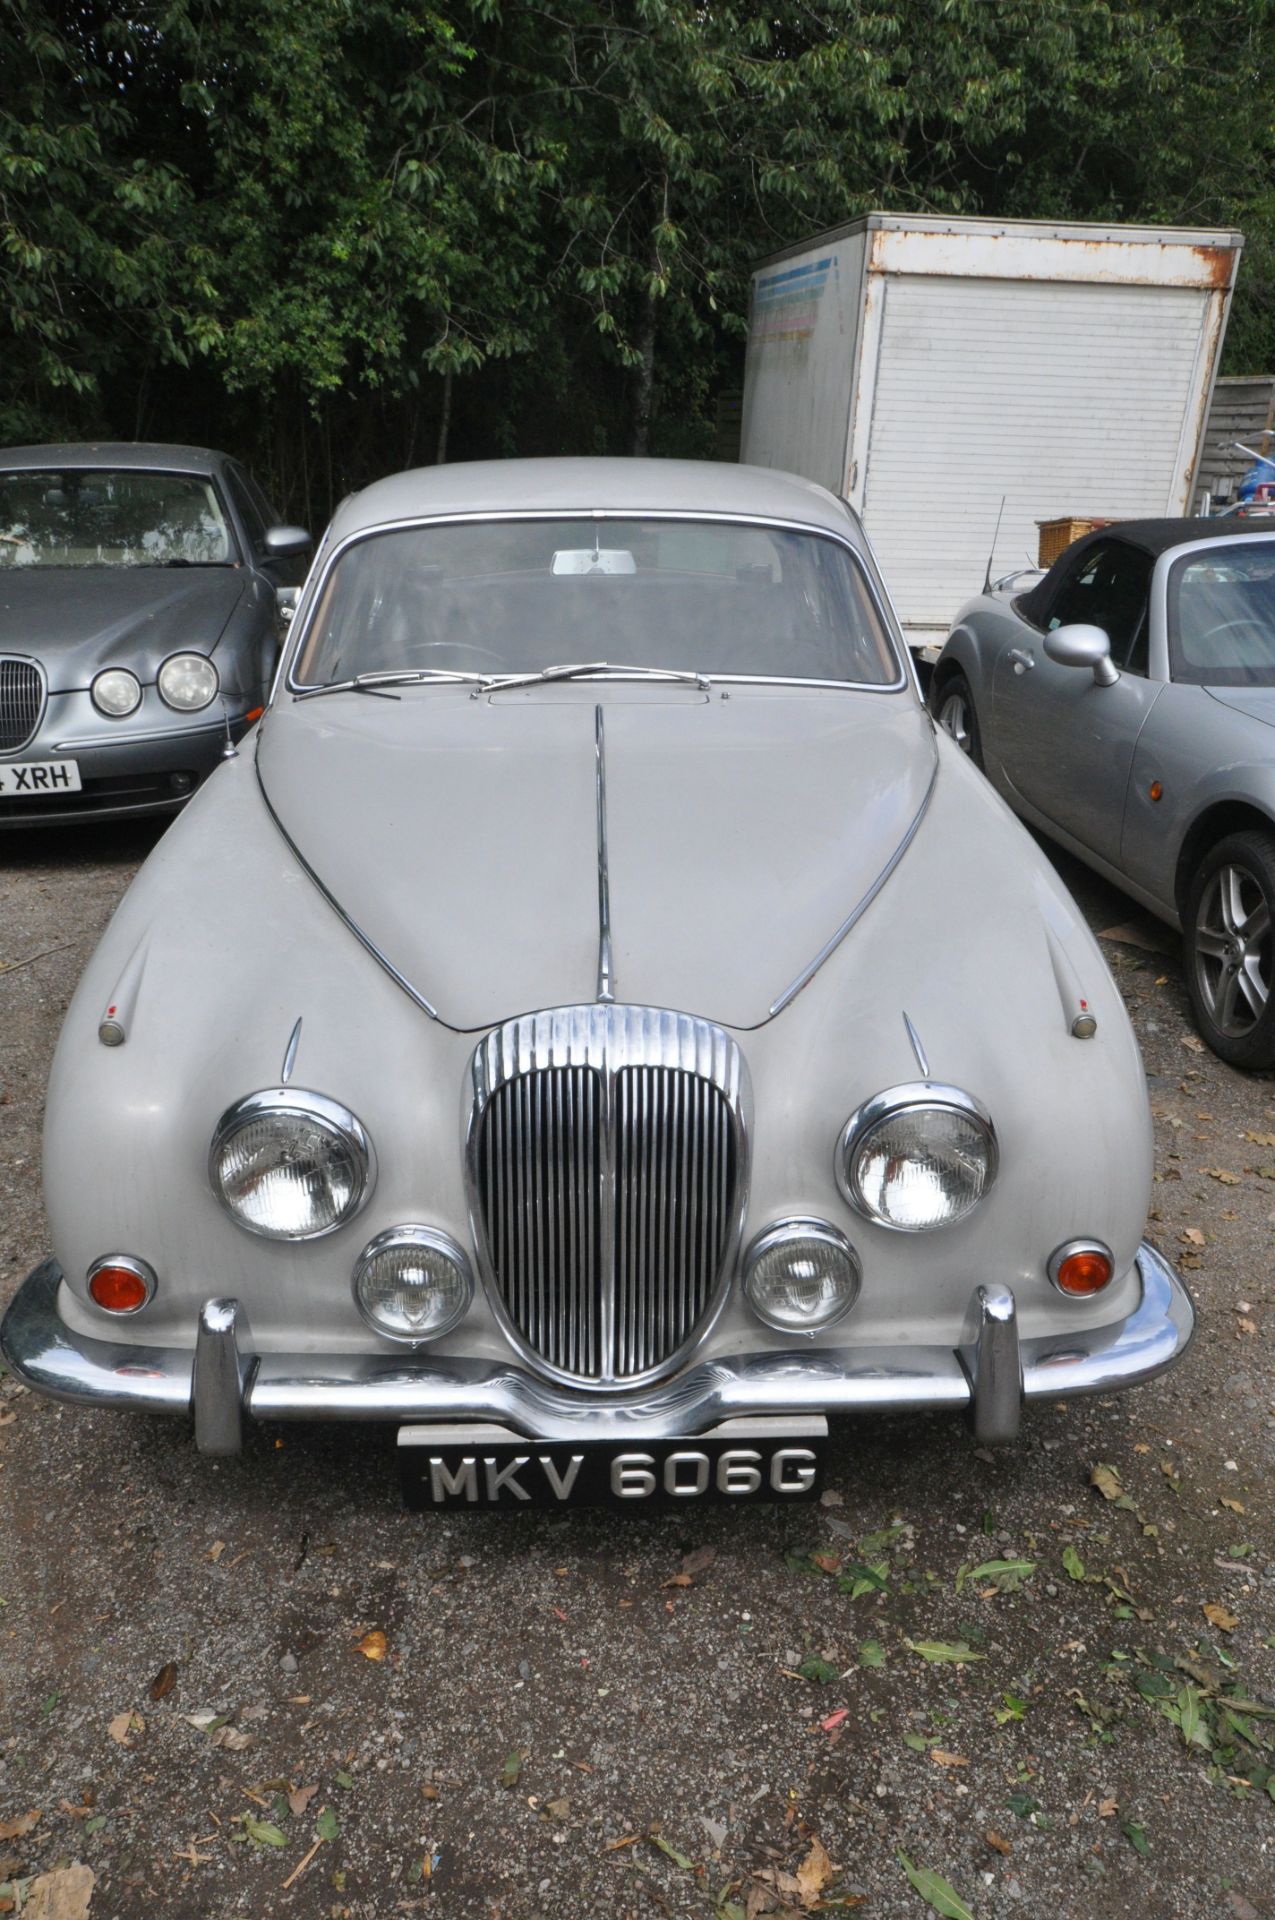 A 1968 DAIMLER V8 250 FOUR DOOR SALOON - MKV 606G - This vehicle was first registered in November - Image 2 of 20